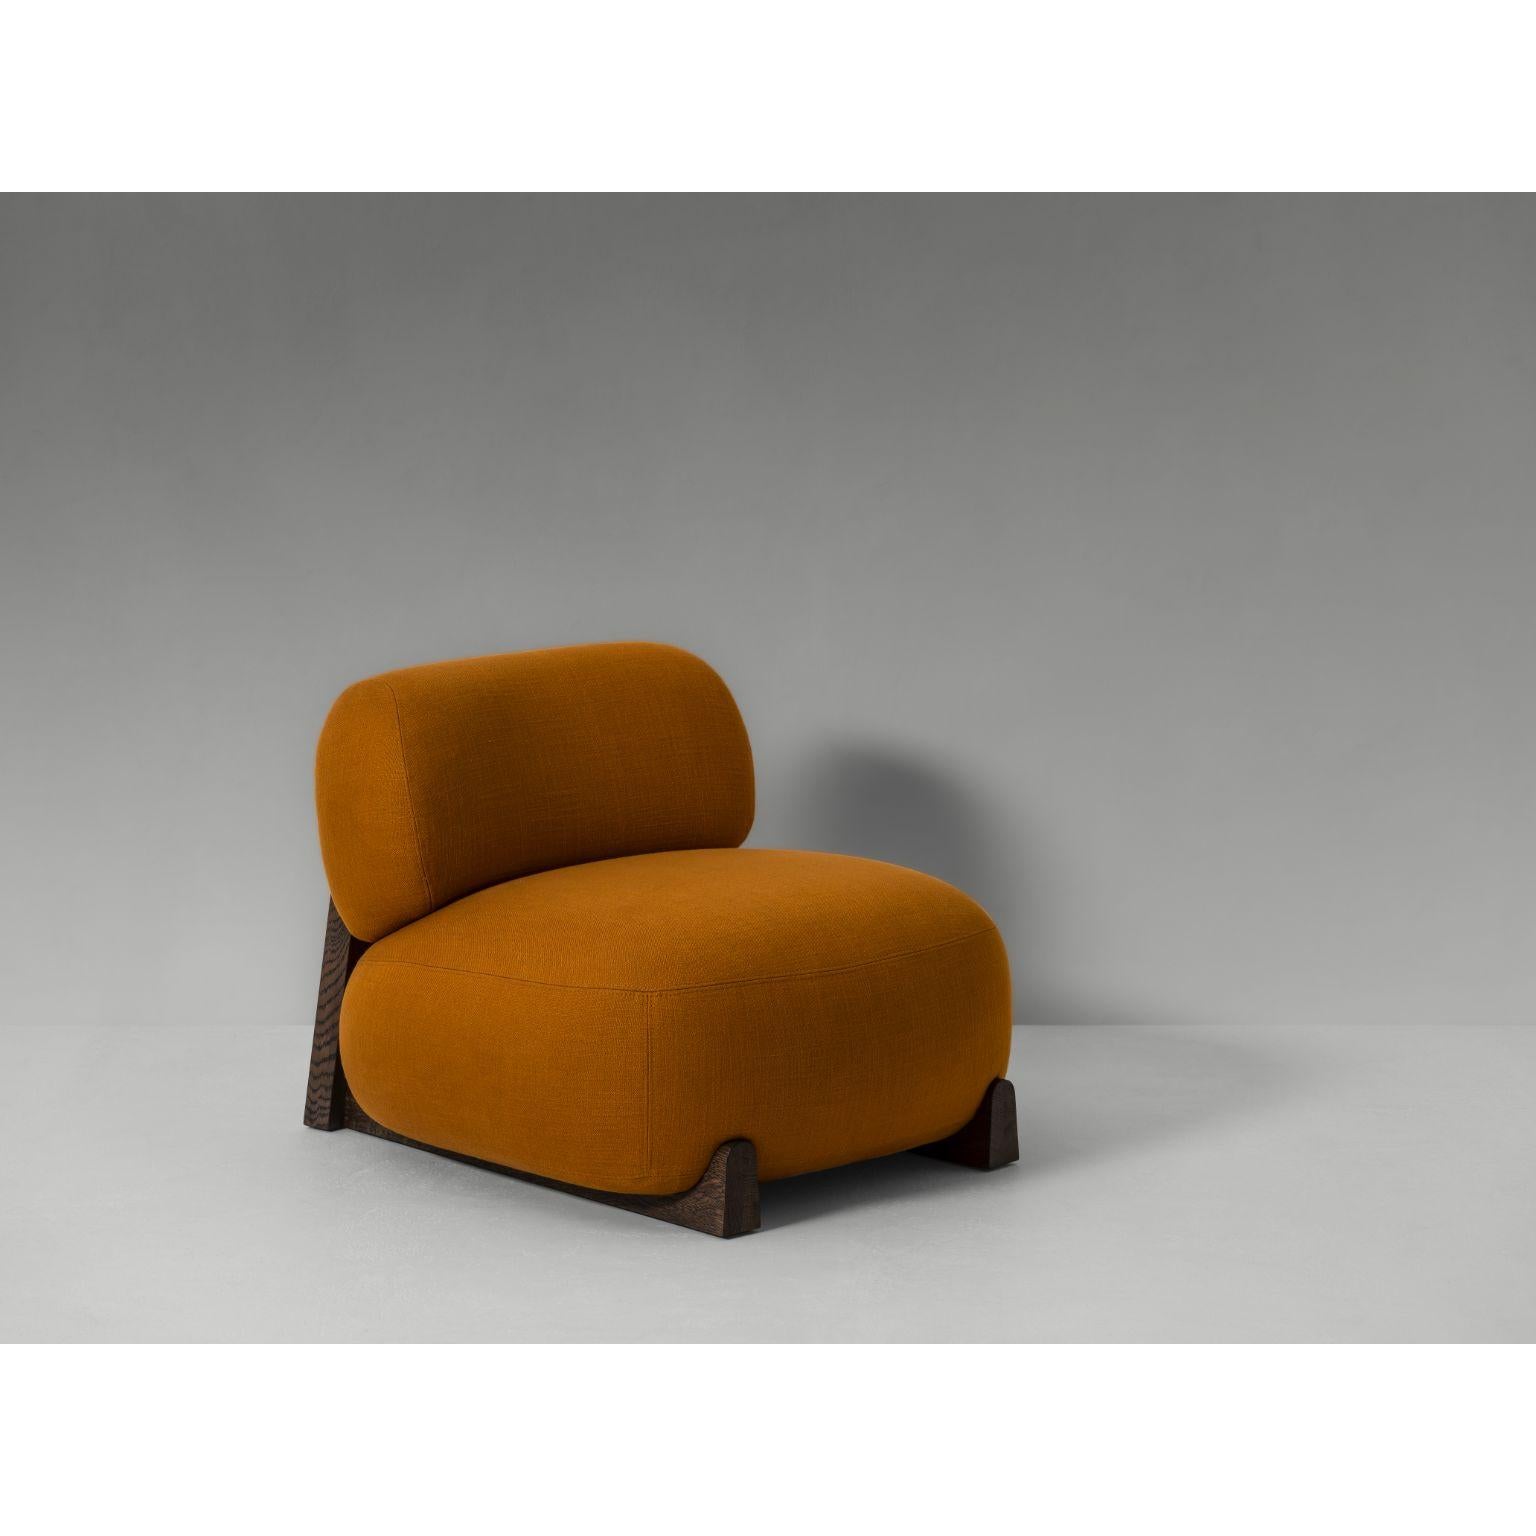 Fort Lounge Chair by Van Rossum
Dimensions: D 85 x W 90 x H 68 cm
Materials: Oak Grey Pepper Brushed, Fabric.

A low-slung lounge chair and sofa, featuring a wide and thick cushioned seat and delicately curved backrest that together provide ample